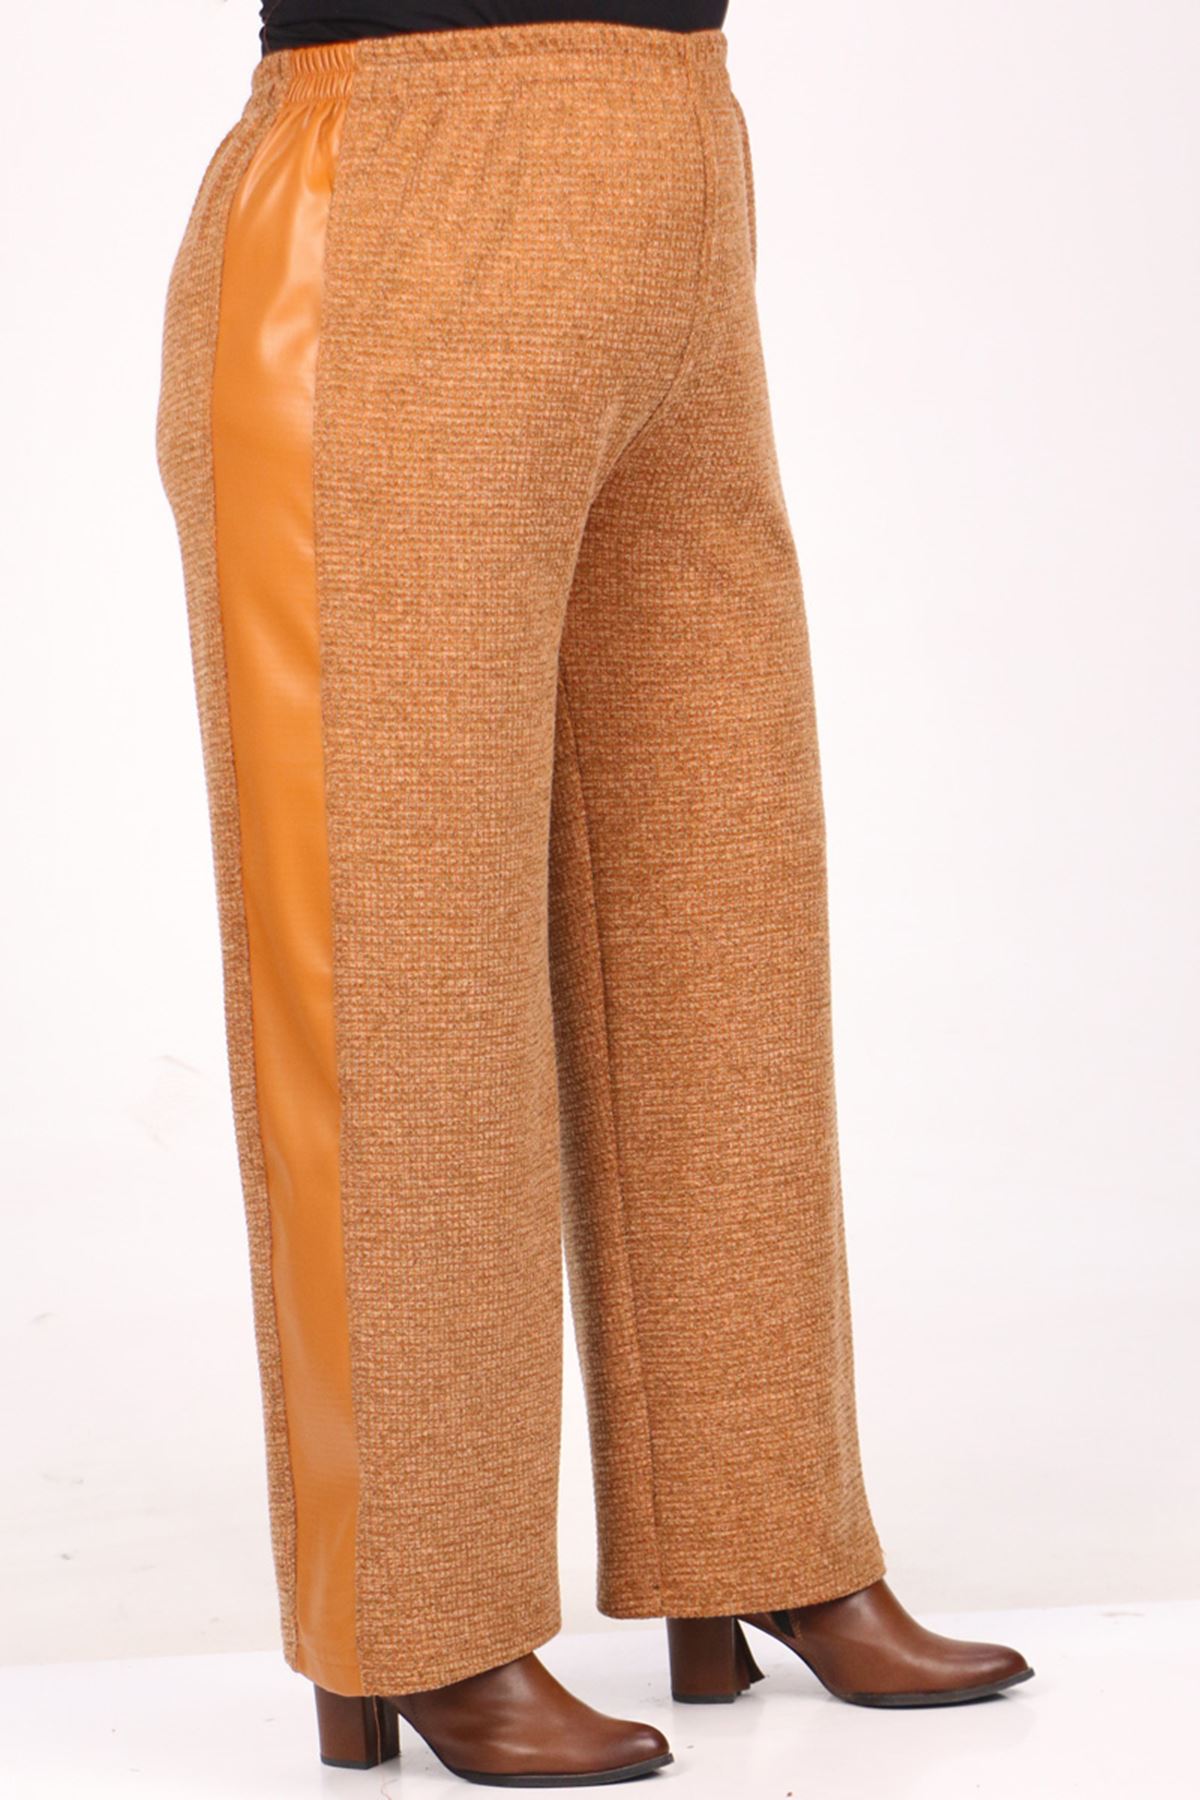 37103 Large Size Honeycomb Textured Leather Detailed Knitwear Suit-Tan